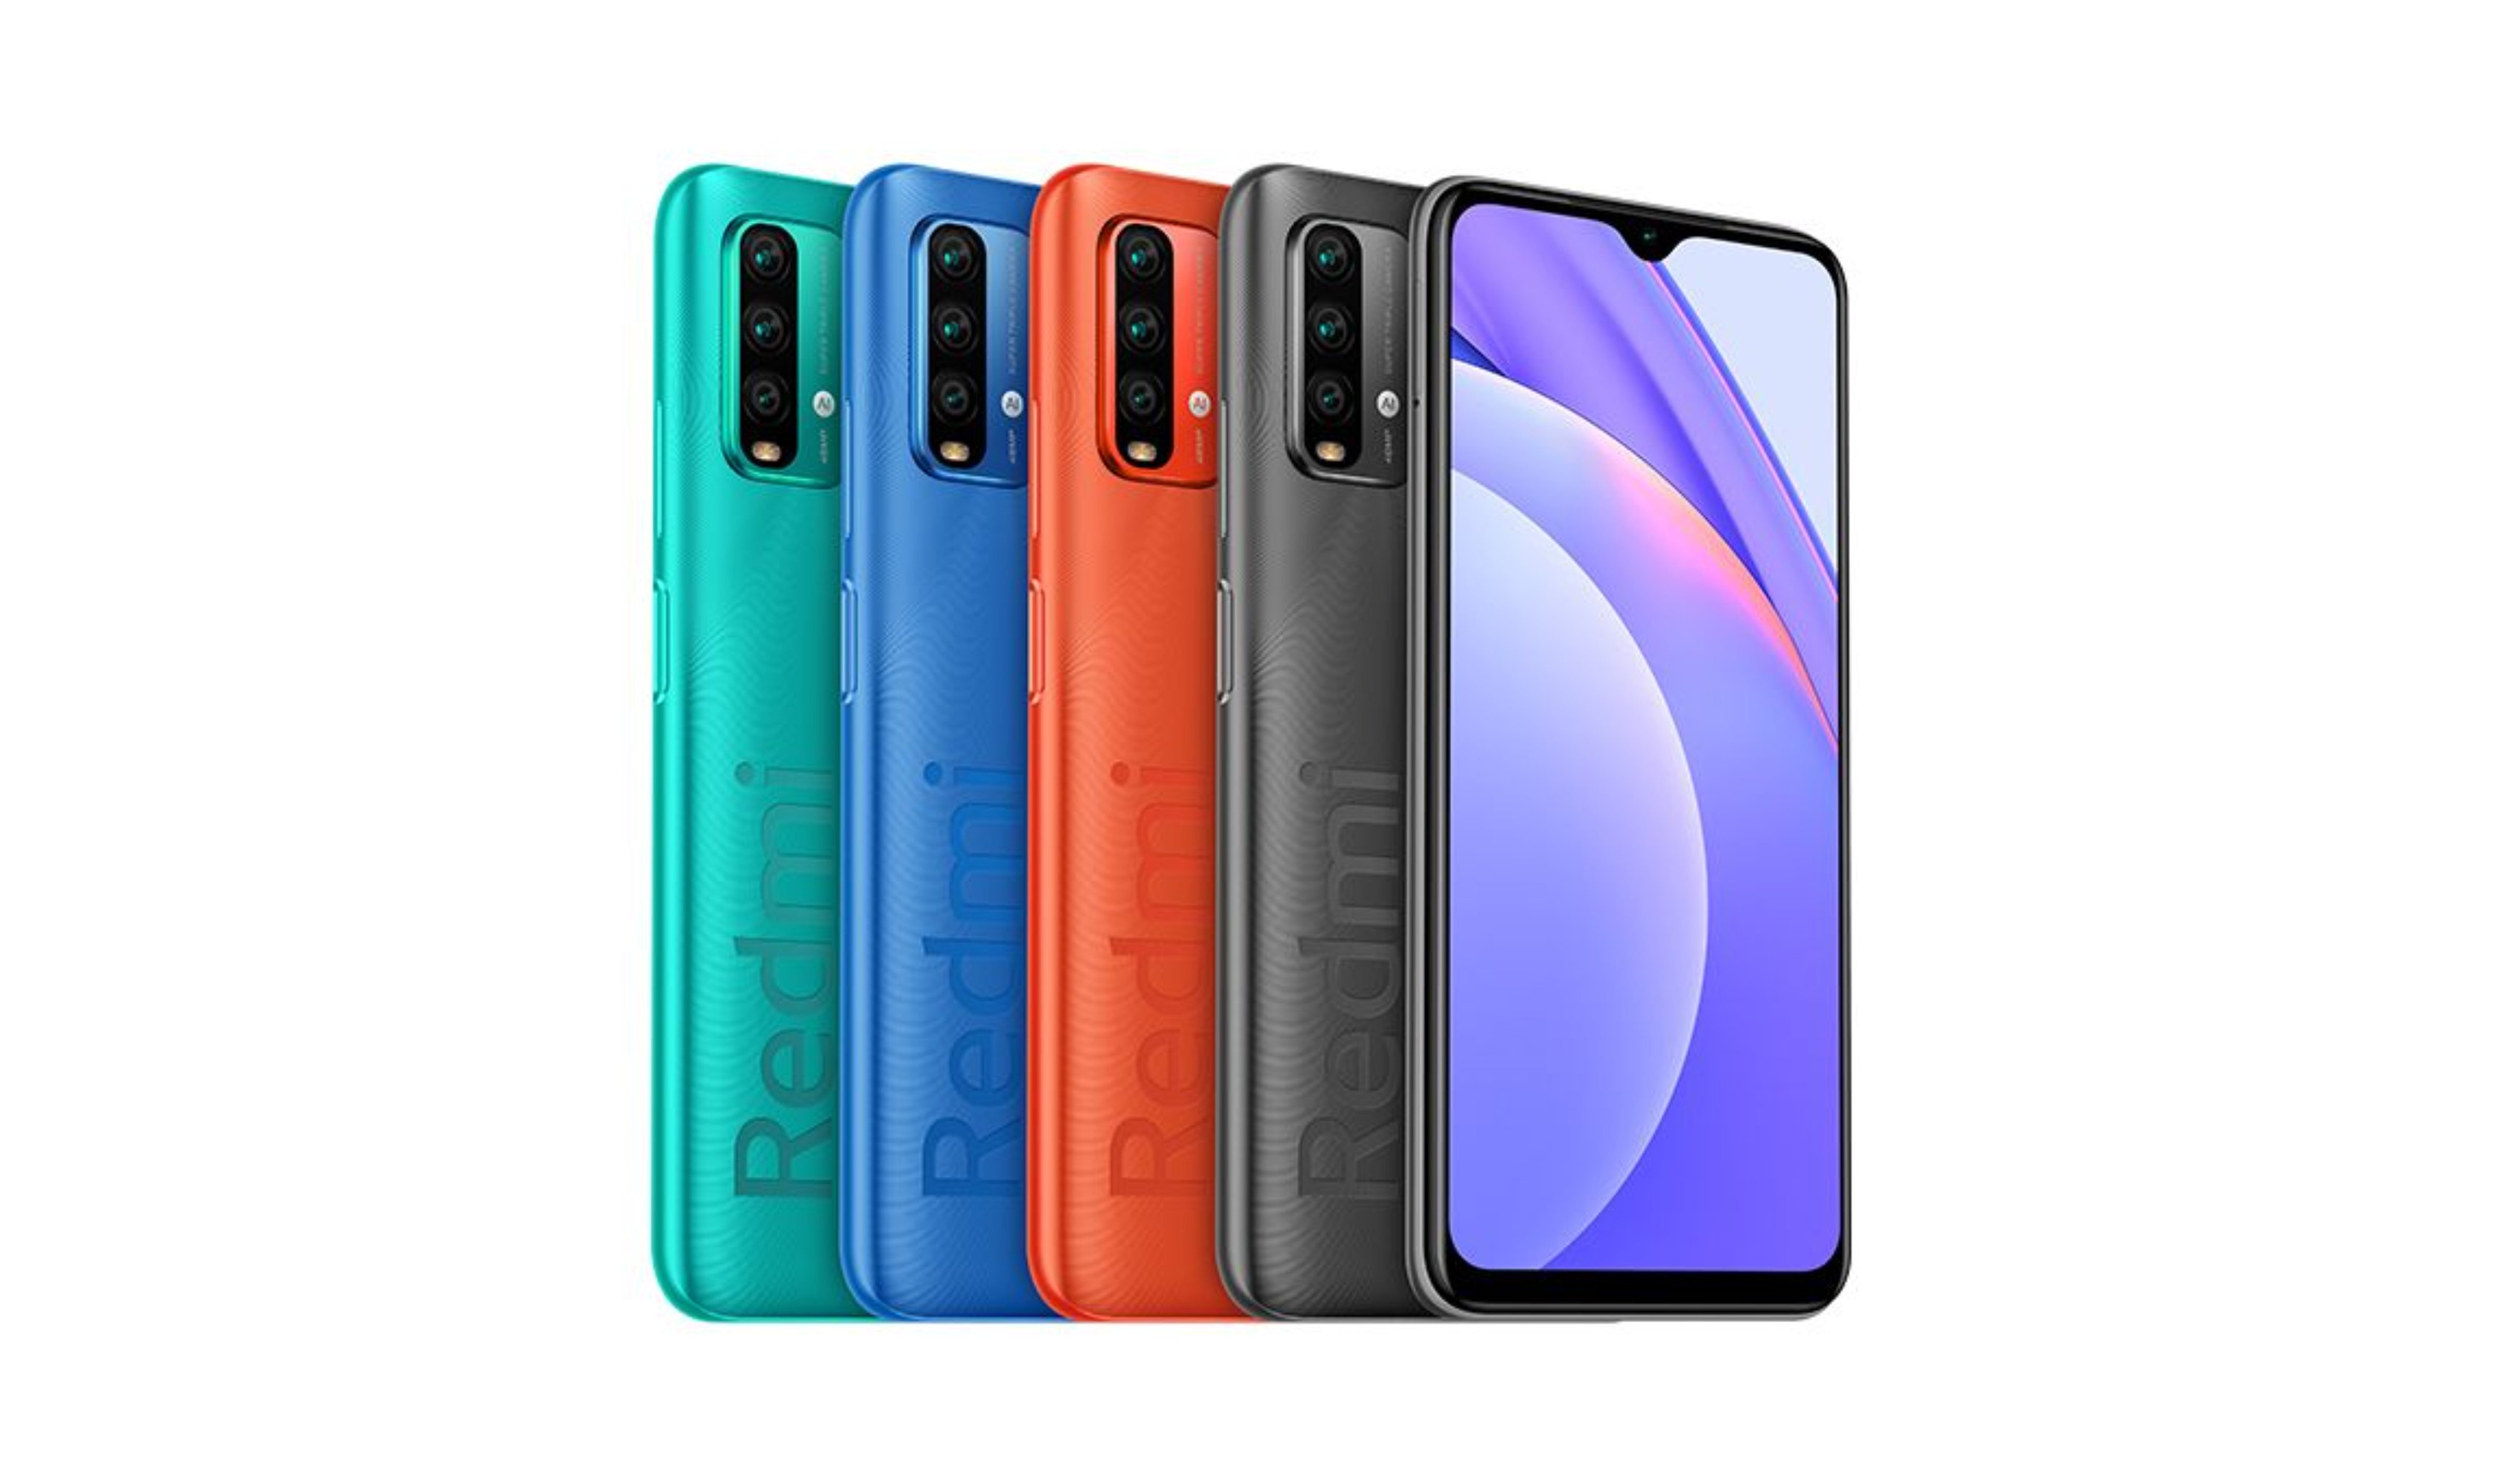 Redmi Note 9 4G all color variants